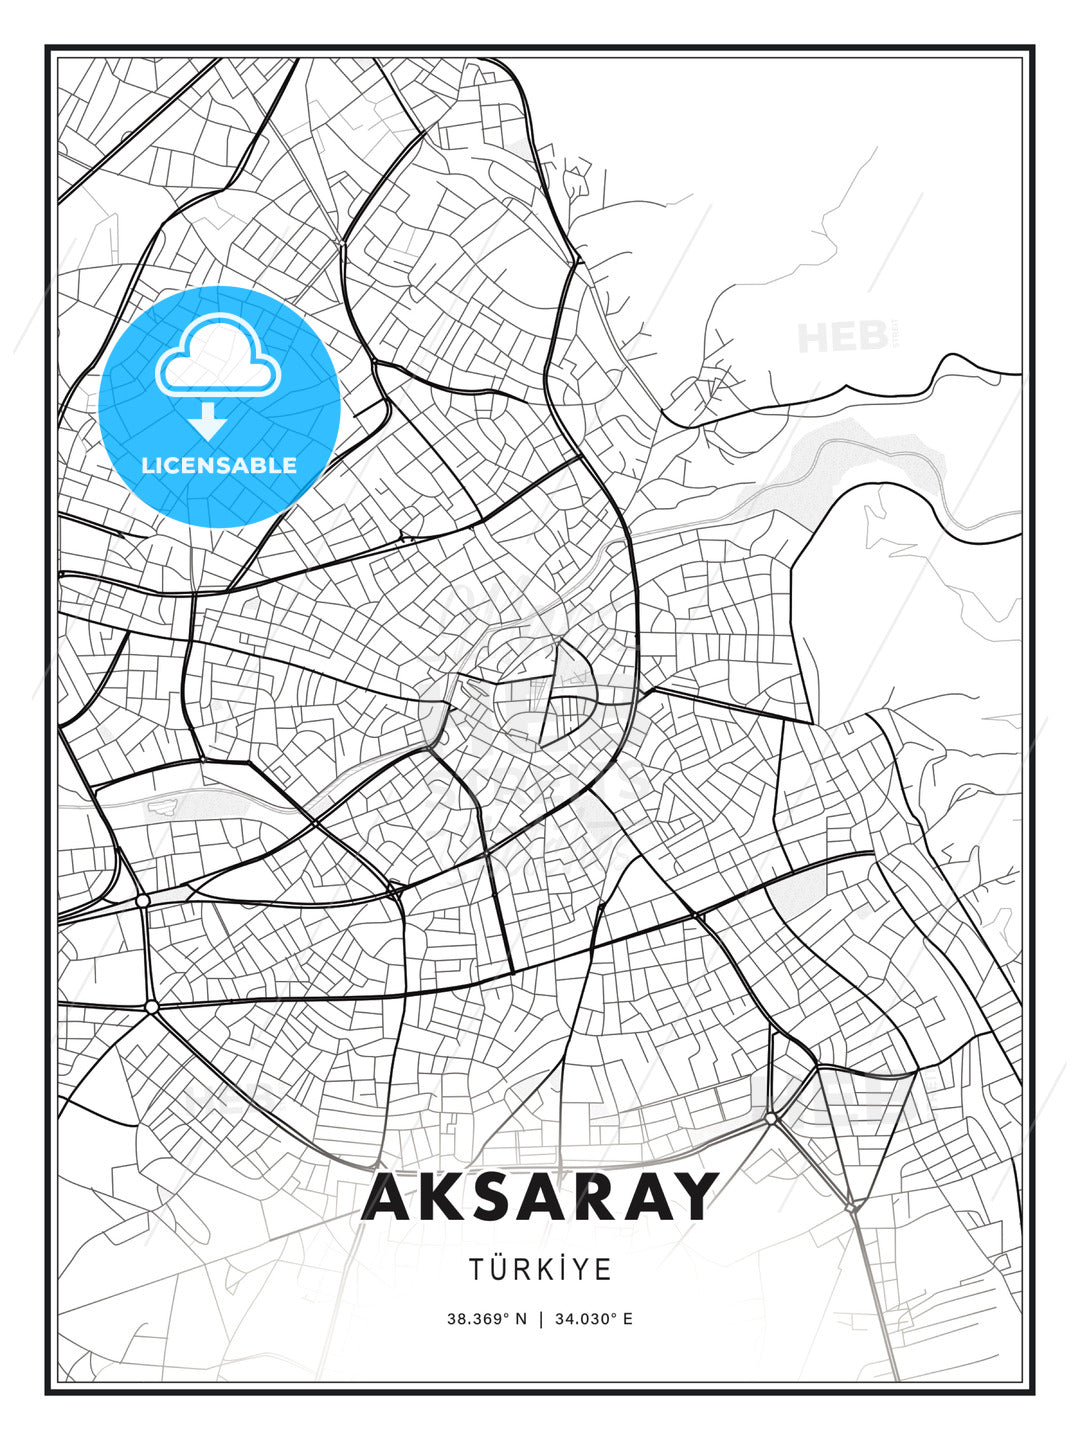 Aksaray, Turkey, Modern Print Template in Various Formats - HEBSTREITS Sketches